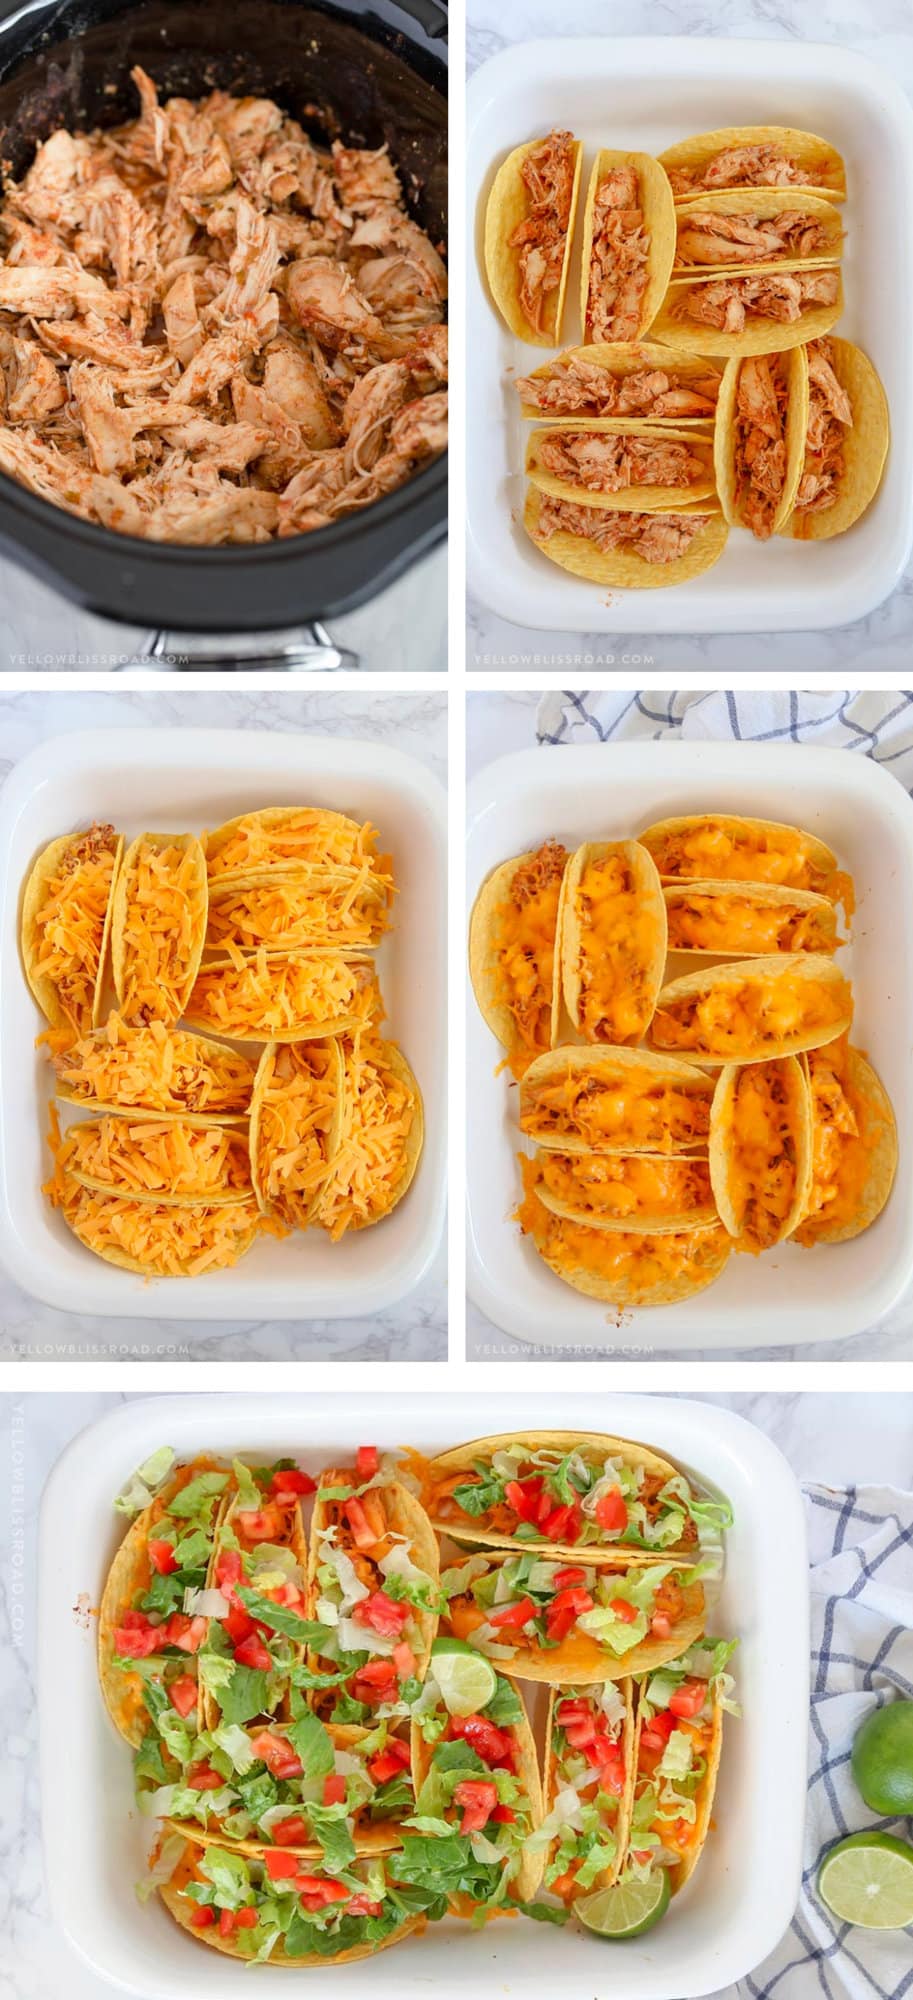 Collage of images showing the steps fo rmaking chicken ranch tacos.